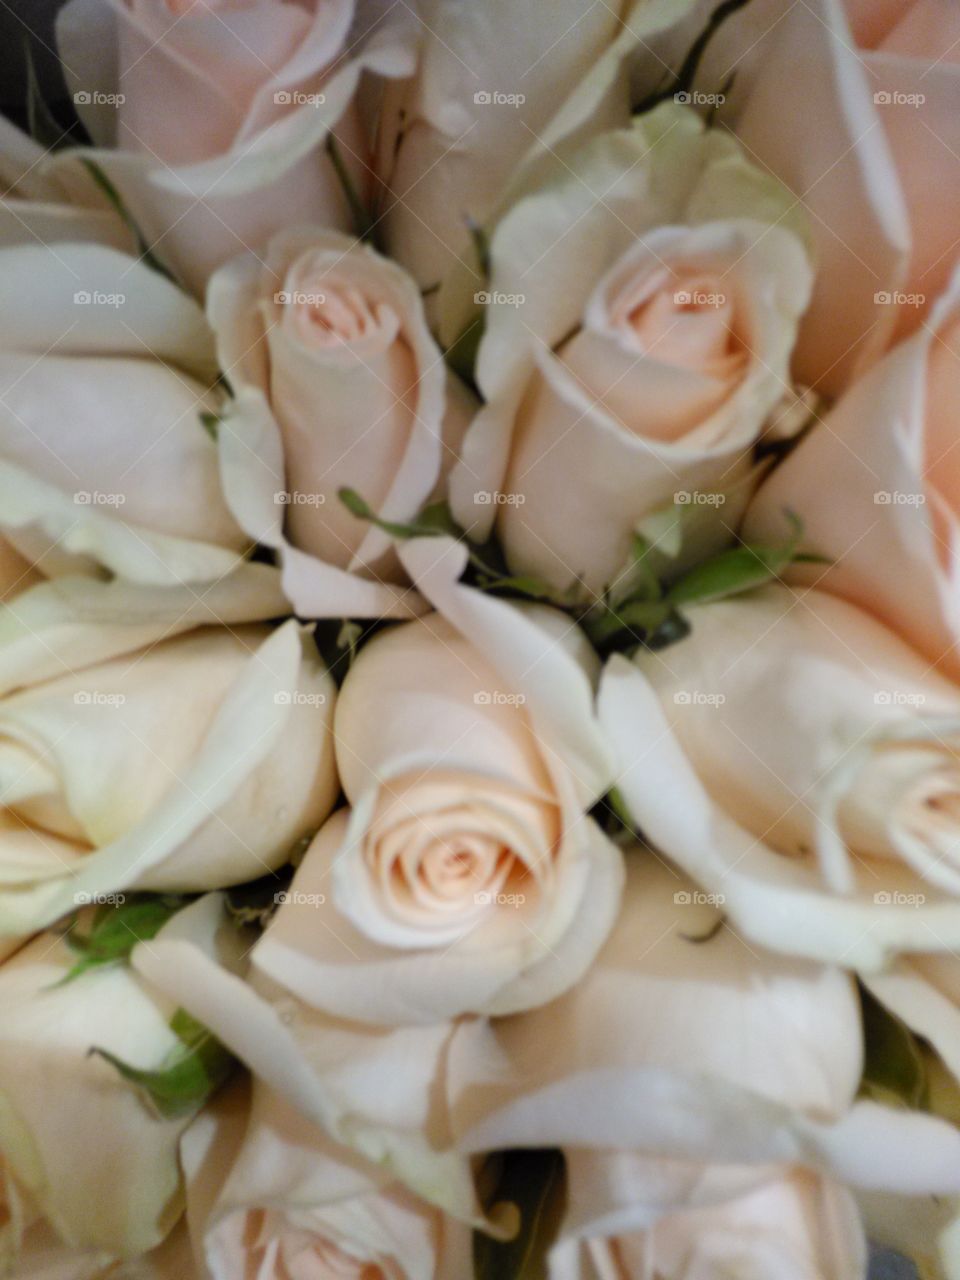 white roses. Bunch of white roses, close up, close crop